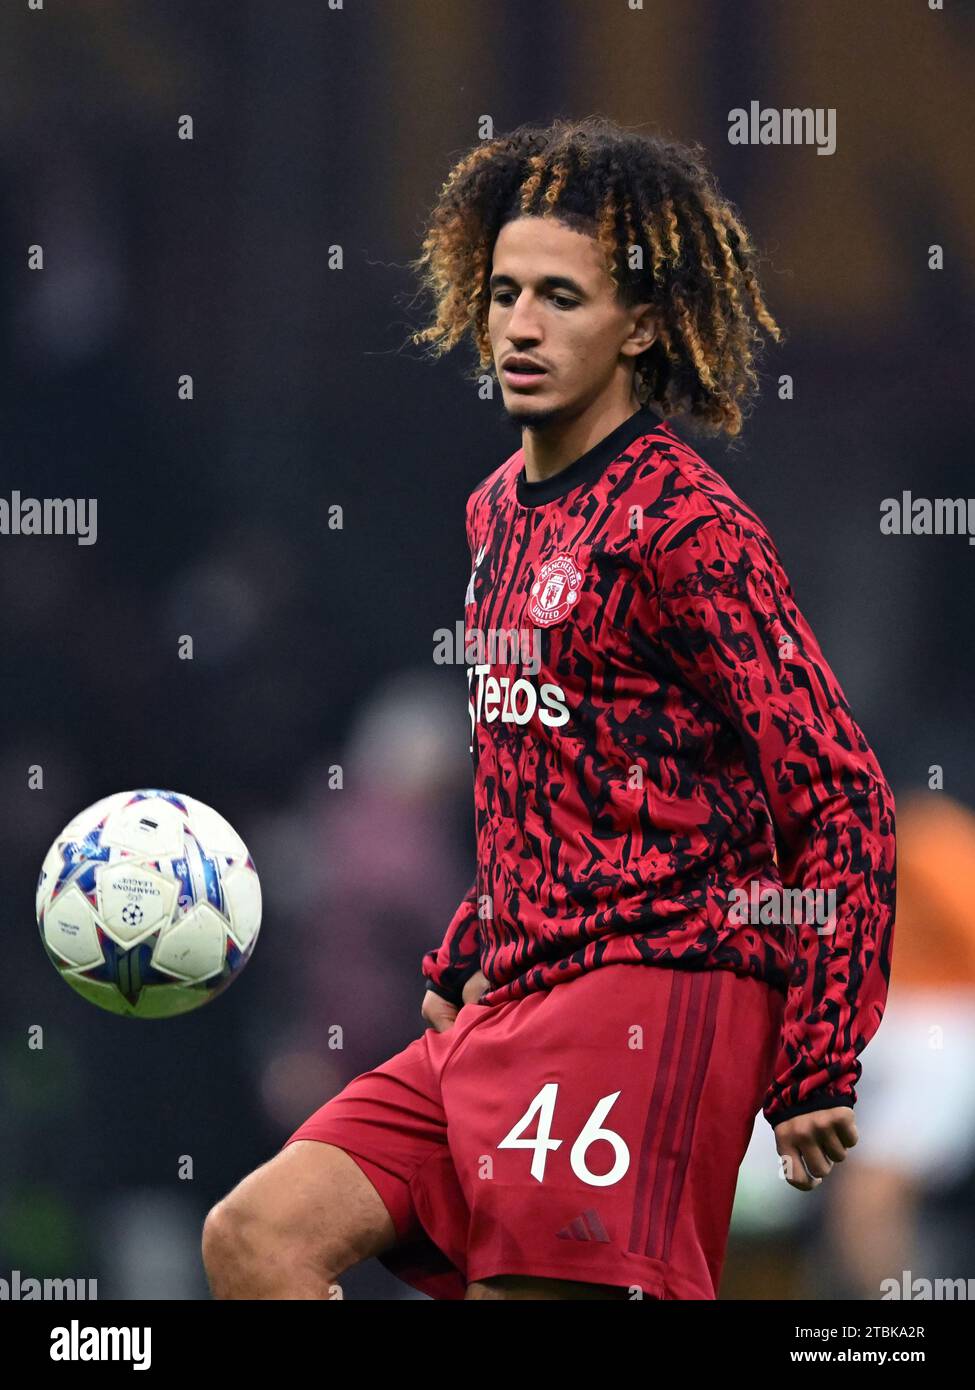 ISTANBUL - Hannibal Mejbri of Manchester United FC during the UEFA Champions League Group A match between Galatasaray SK and Manchester United FC at Ali Sami Yen Spor Kompleksi Stadium on November 29 in Istanbul, Turkey. ANP | Hollandse Hoogte | GERRIT VAN COLOGNE Stock Photo